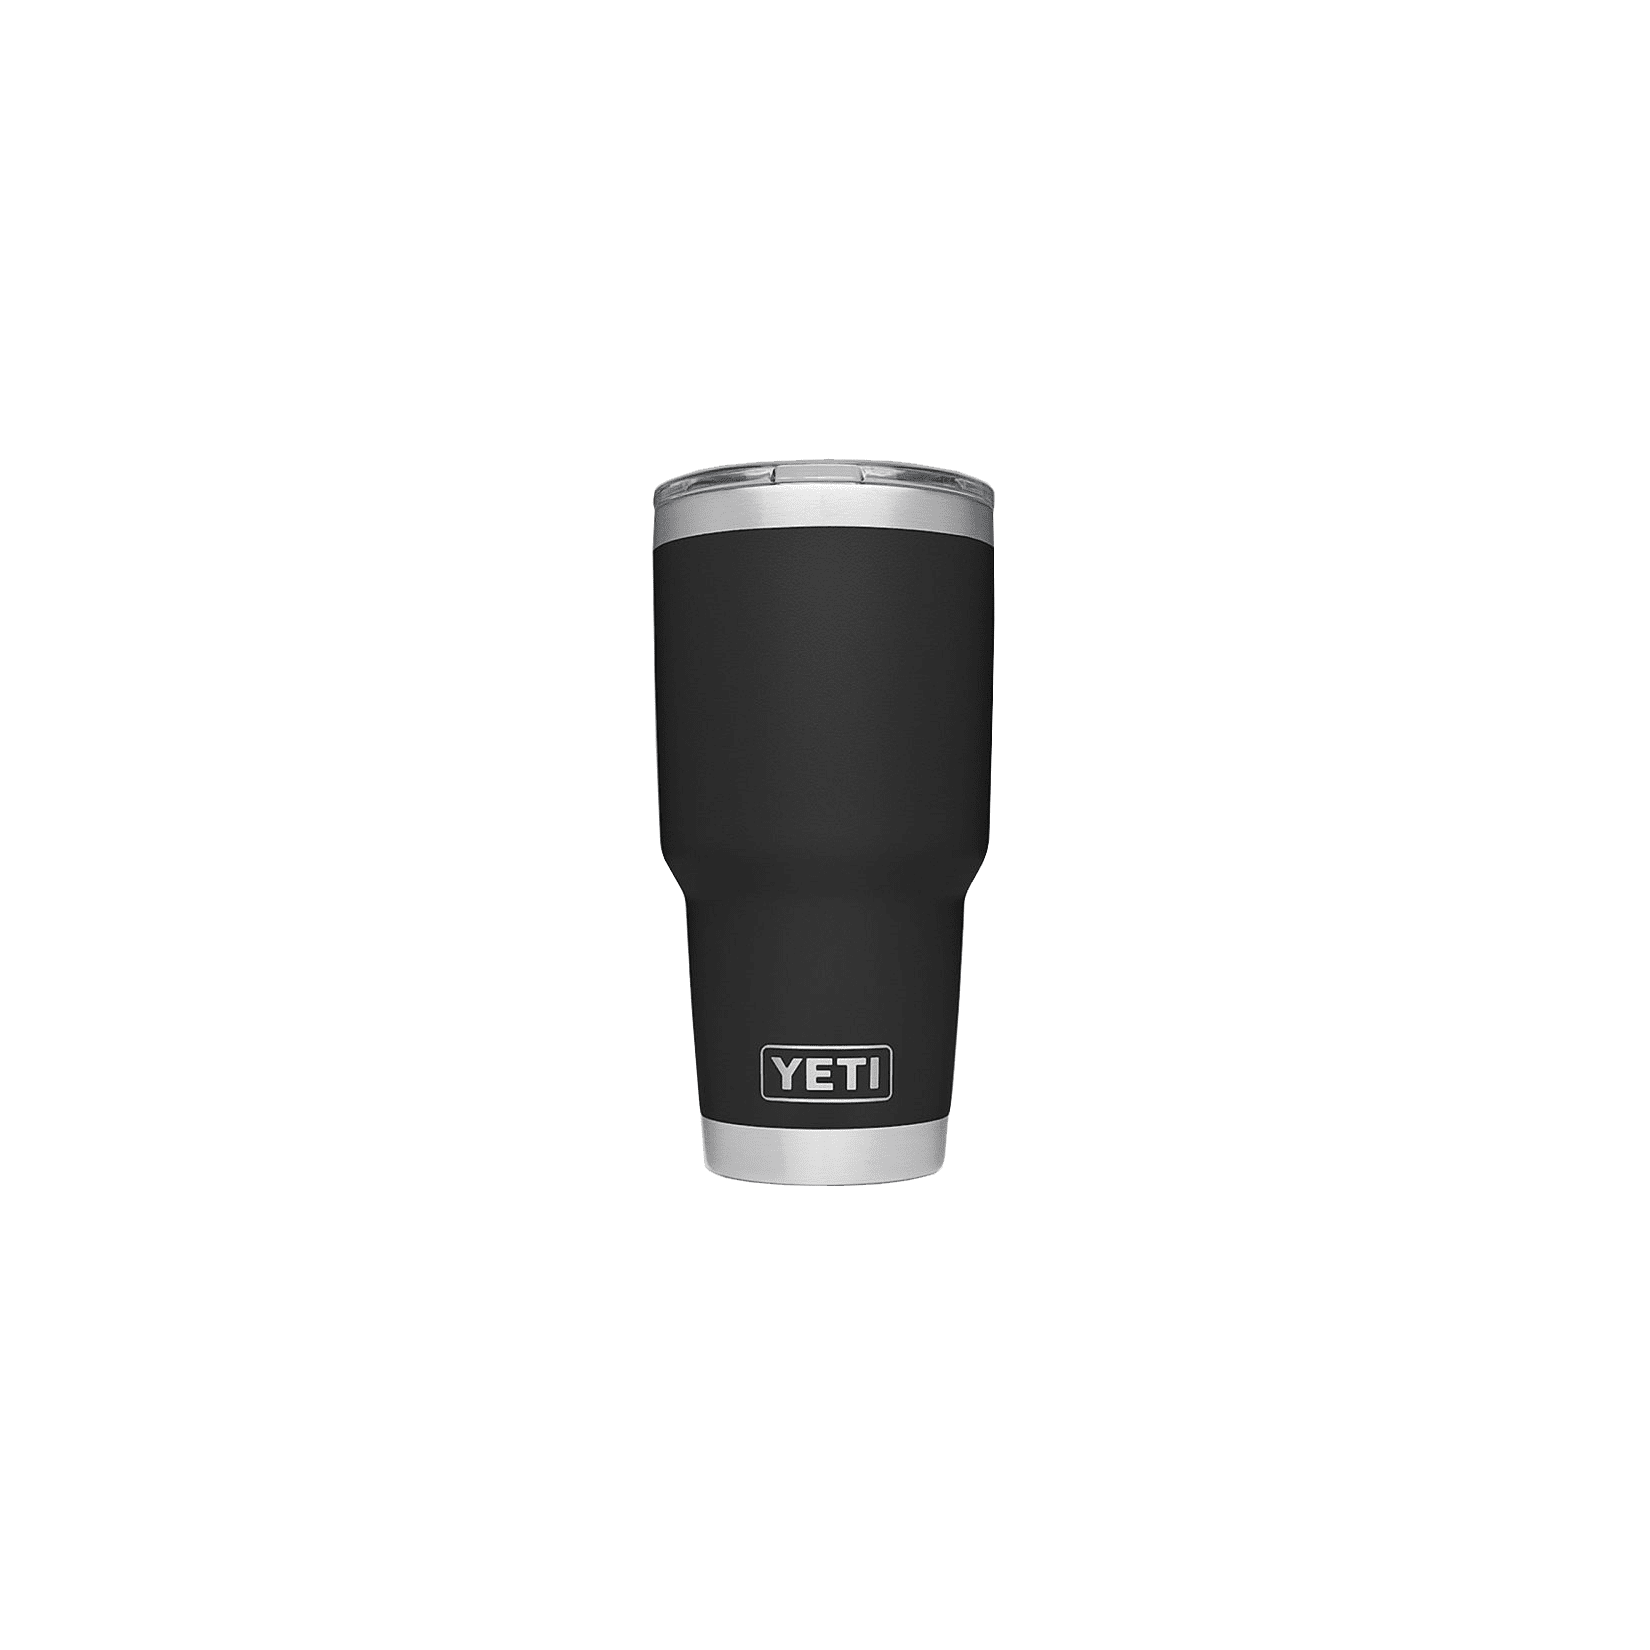 https://image.fisheriessupply.com/c_lpad,dpr_3.0,w_550,h_550,d_imageComingSoon-tiff/f_auto,q_auto/v1/static-images/yeti-coolers-rambler-insulated-tumblers-4-colors-black